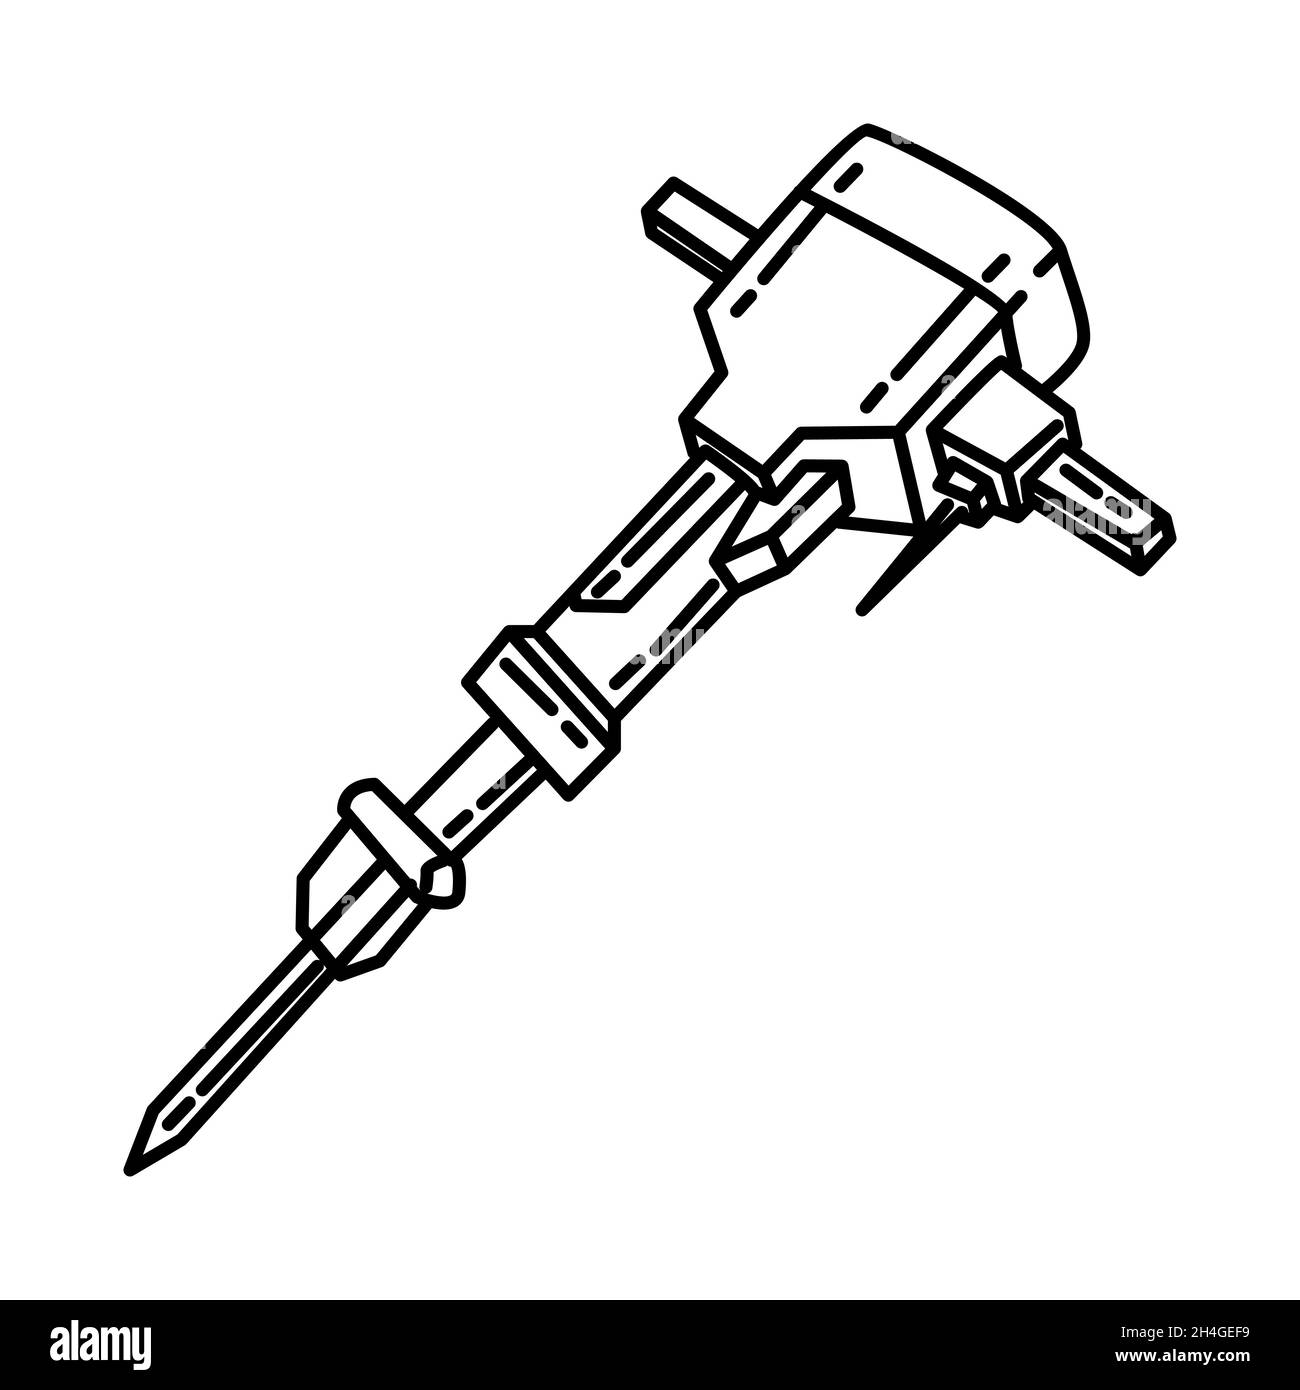 Jack Hammer Part of Contractor Material and Equipment Device Hand Drawn Icon Set Vector. Stock Vector